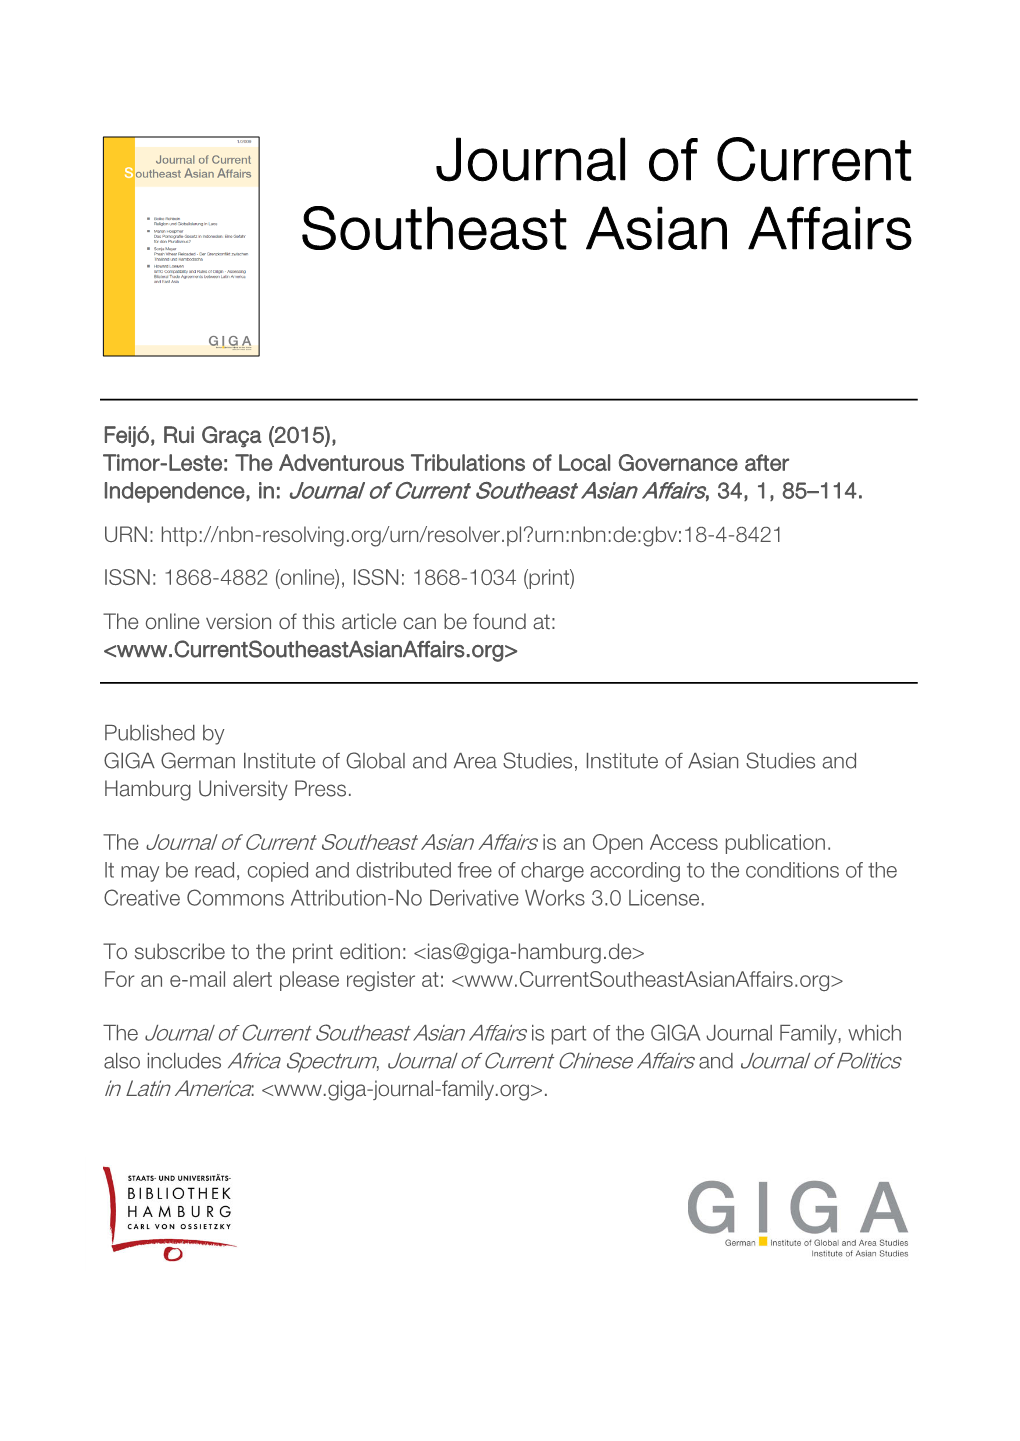 Timor-Leste: the Adventurous Tribulations of Local Governance After Independence, In: Journal of Current Southeast Asian Affairs, 34, 1, 85–114